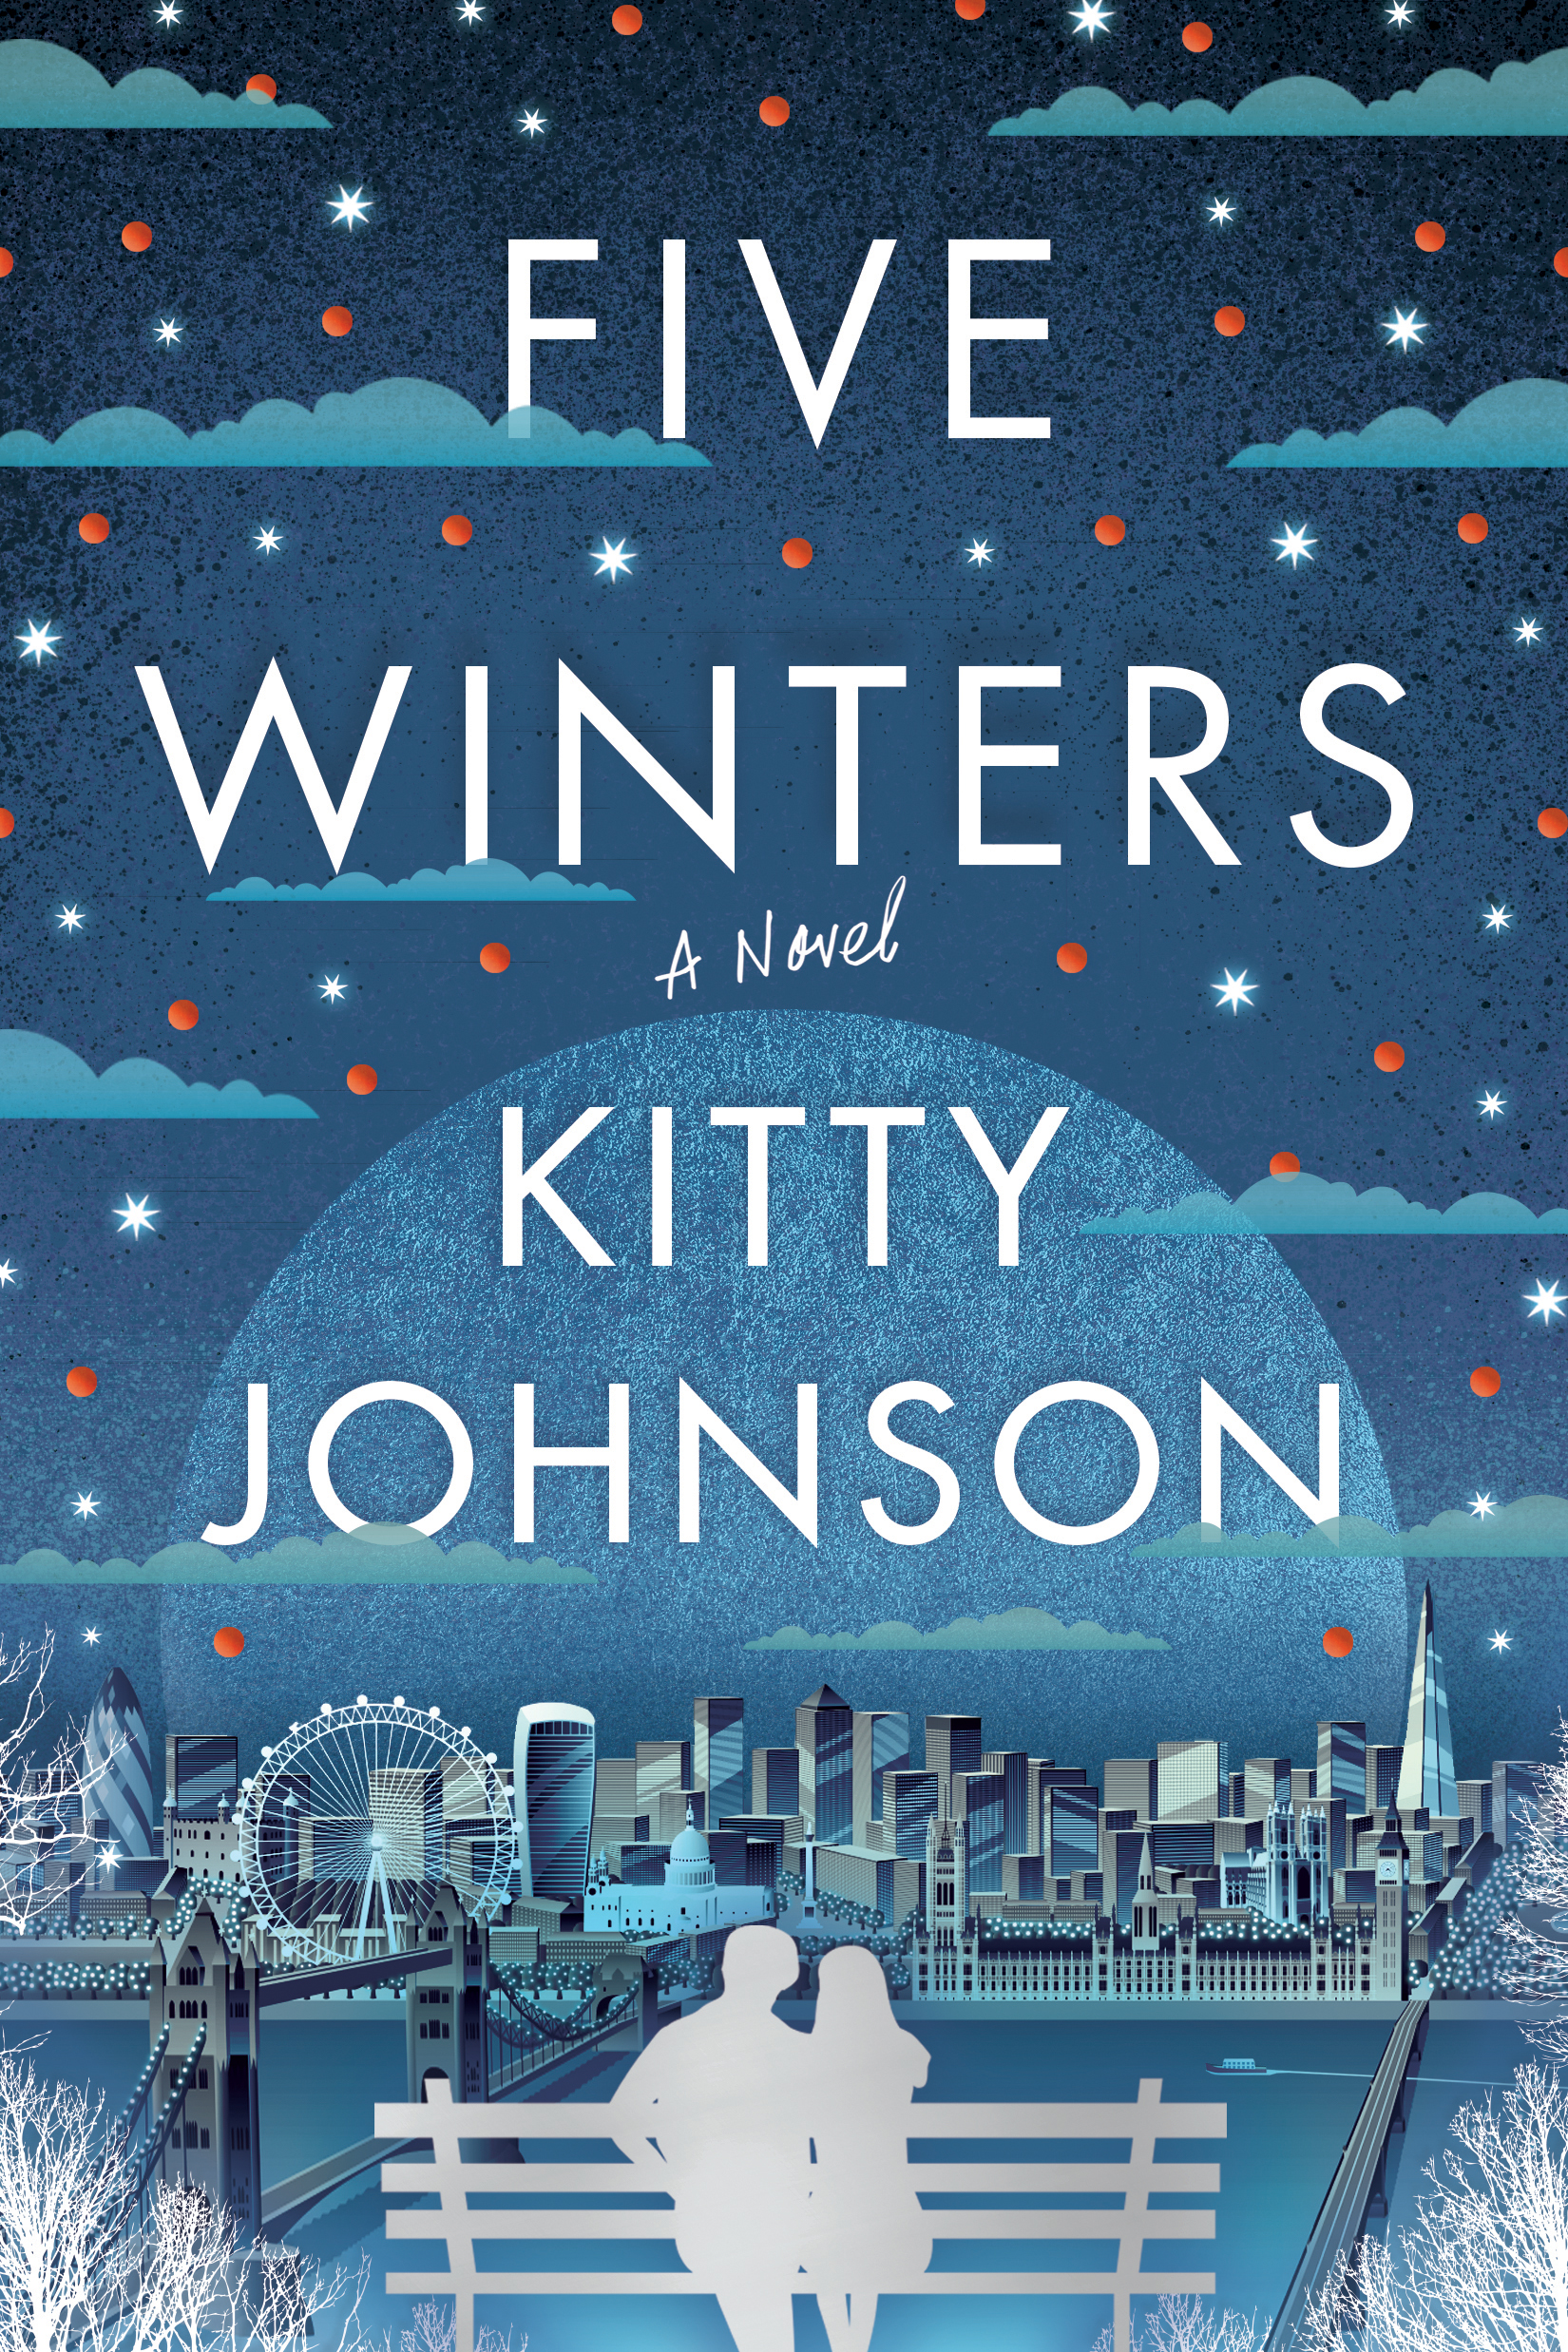 Five Winters by Kitty Johnson PDF Download